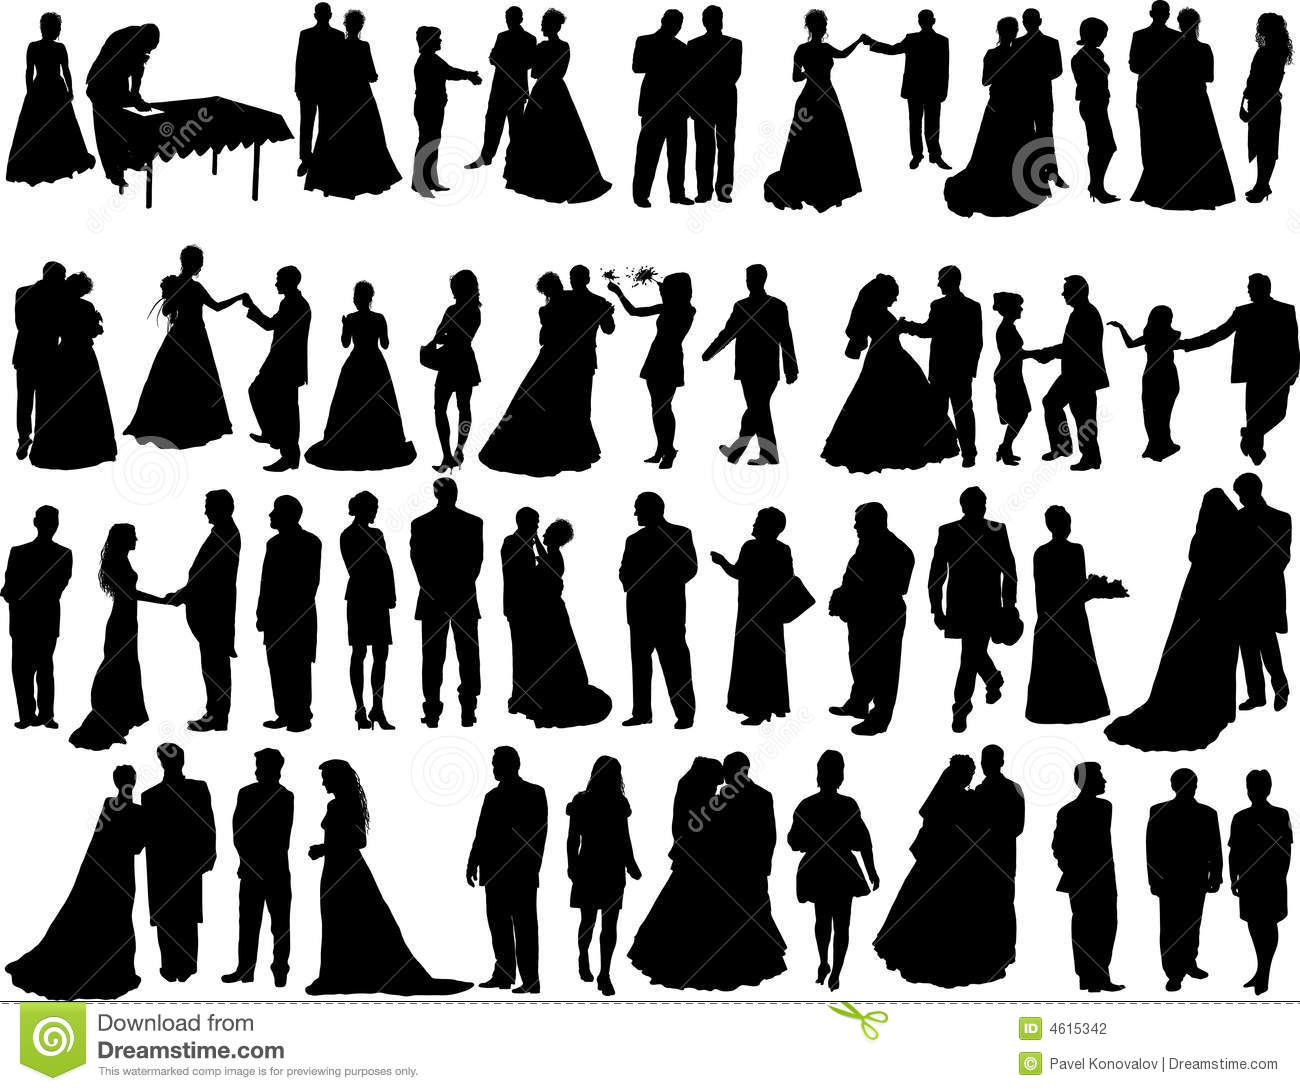 Wedding silhouettes - Wedding Party Silhouette Clip Art